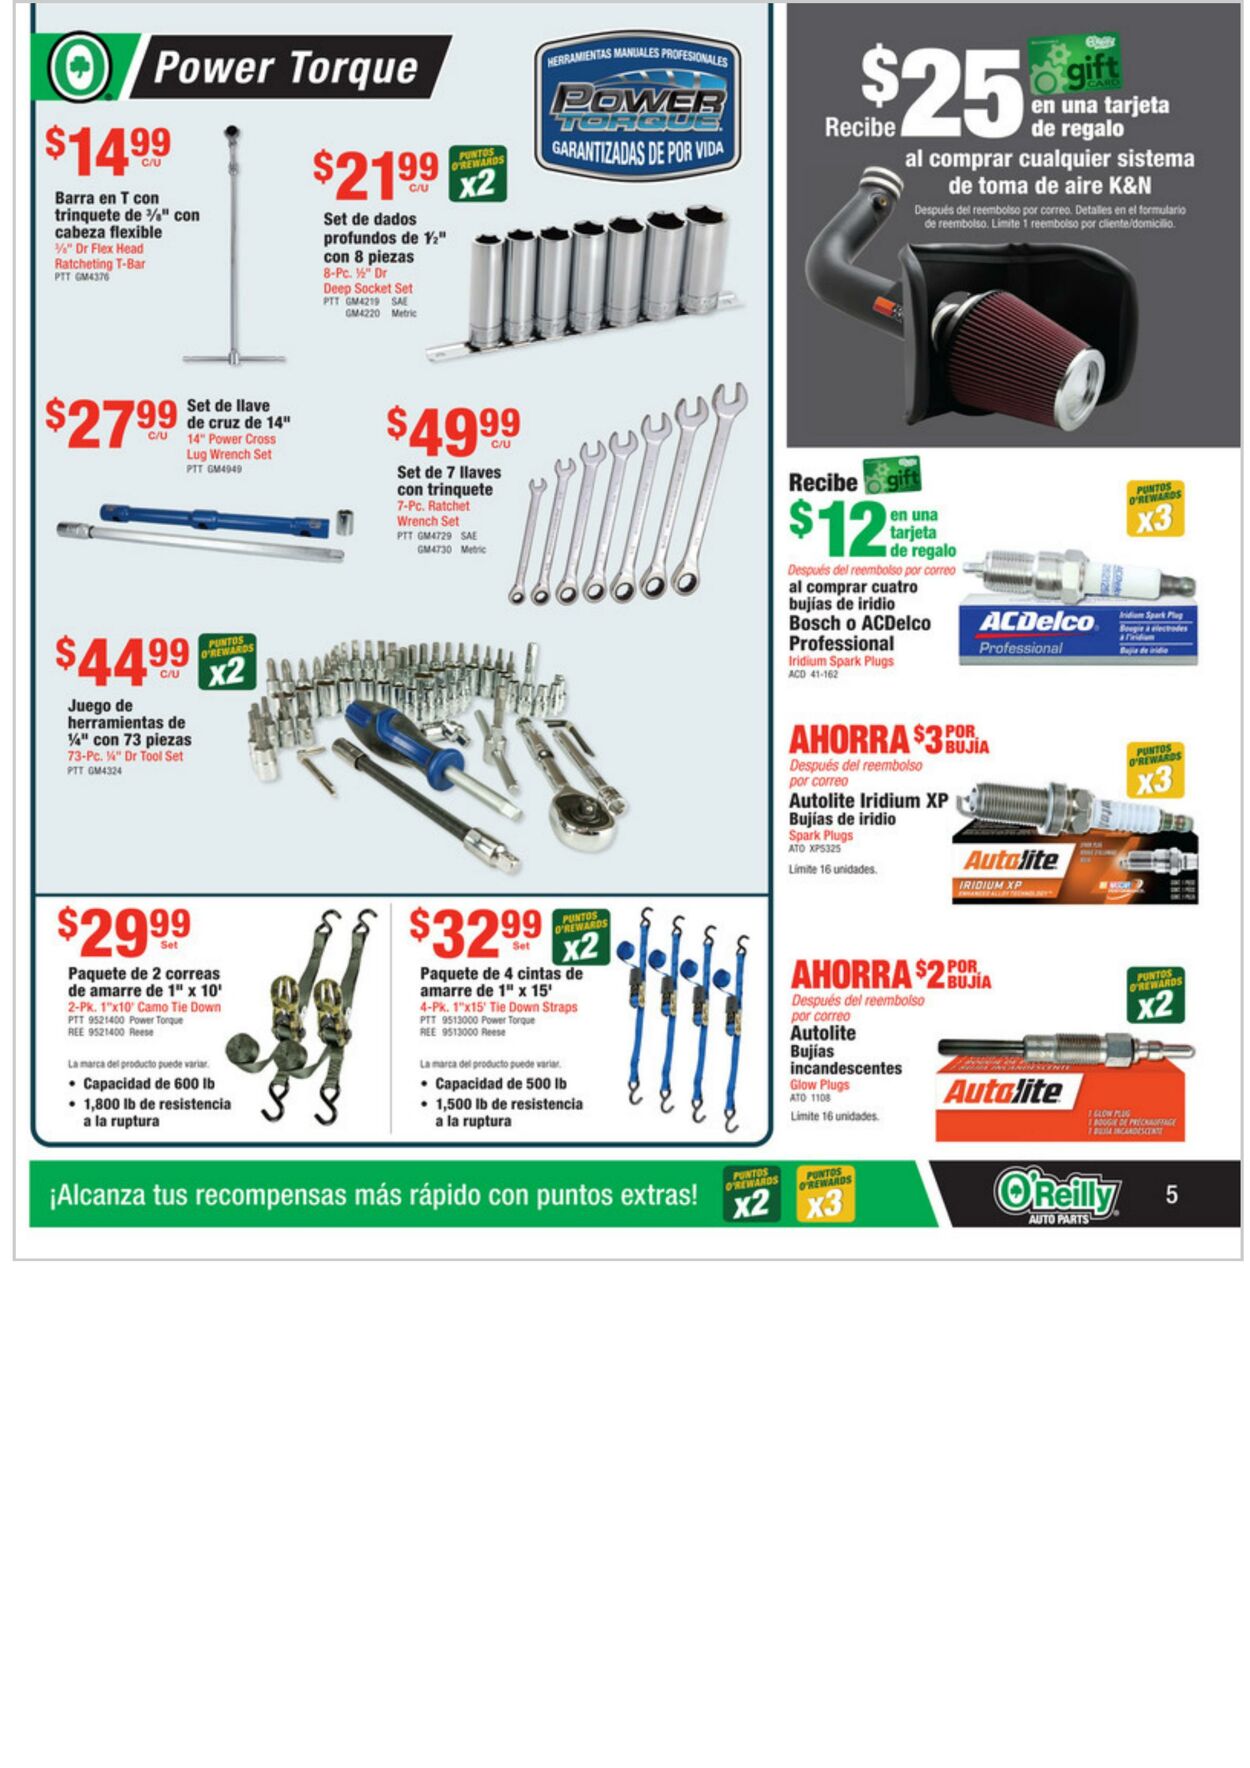 Weekly ad O’Reilly Auto Parts 11/24/2021 - 12/28/2021